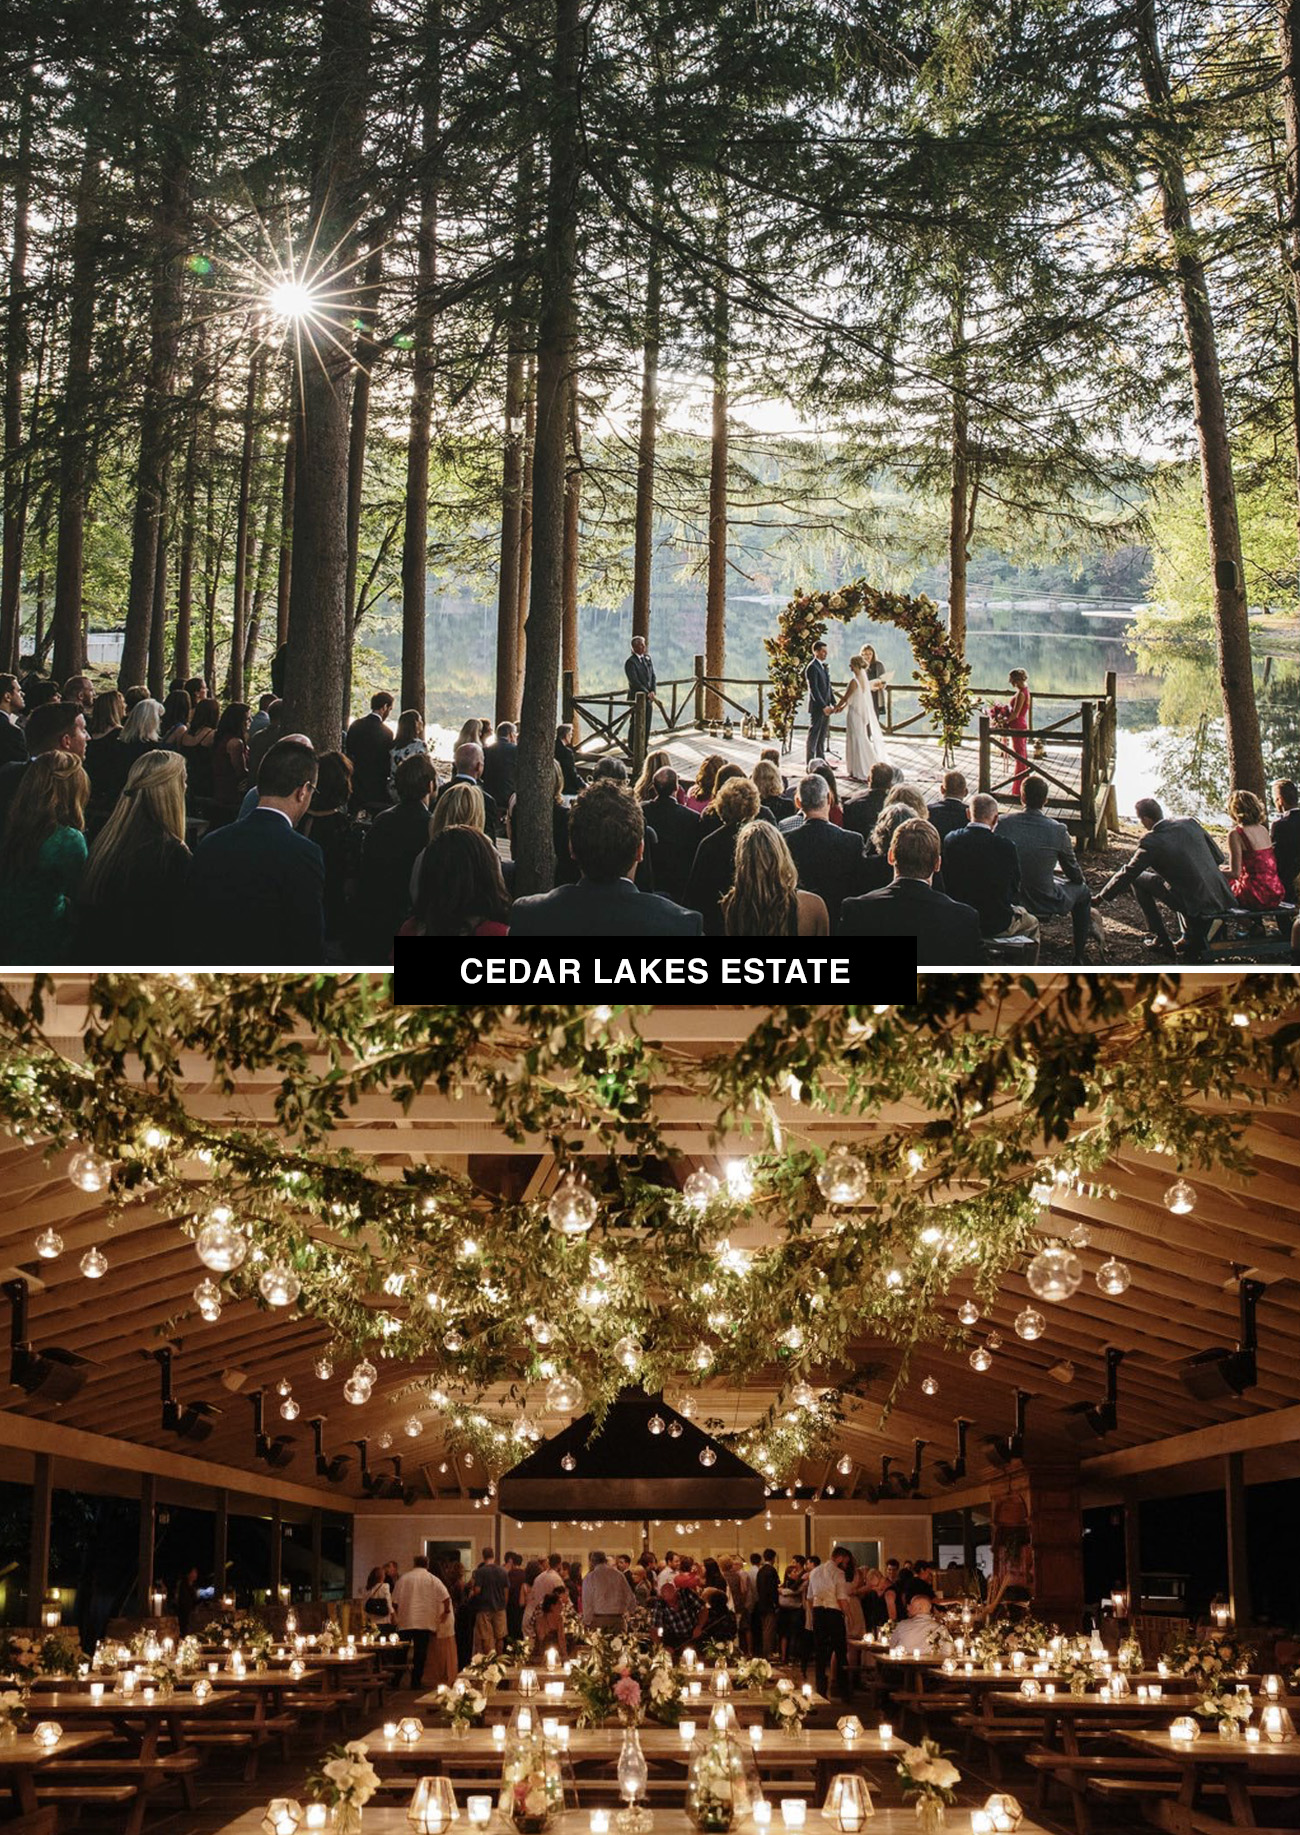 Cedar Lakes Estate wedding venue in New York is the place to get married if you're seeking a camp wedding in the northeast